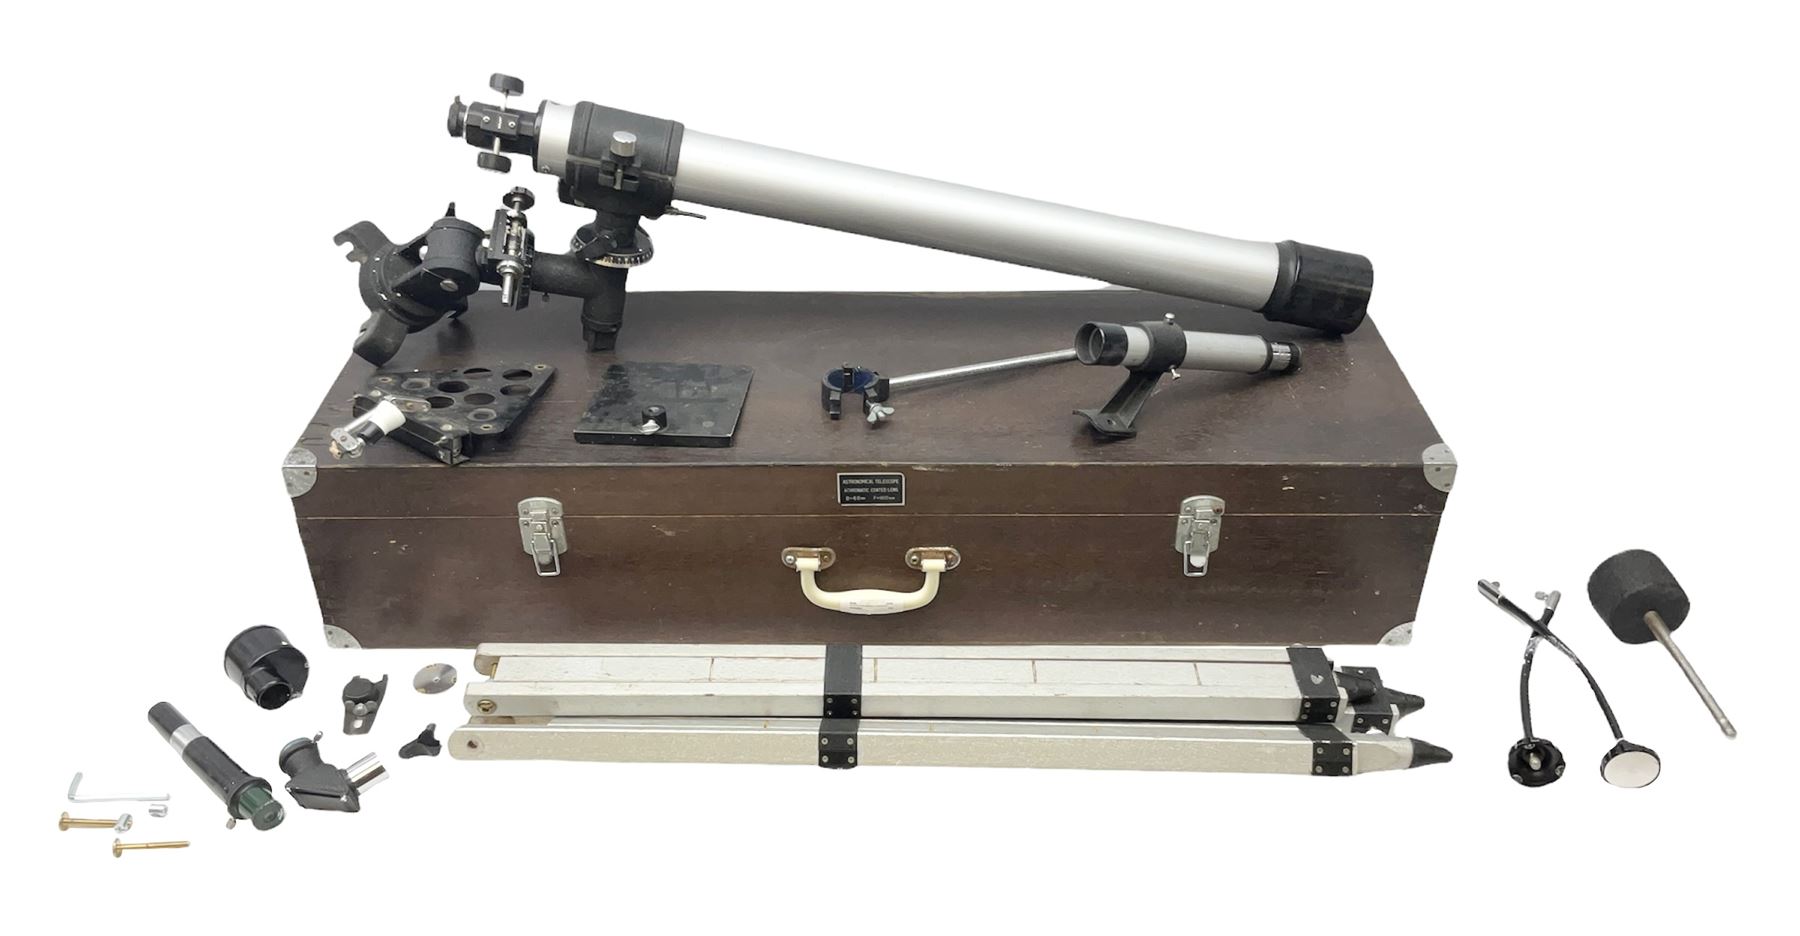 Astronomical telescope with achromatic coated lens